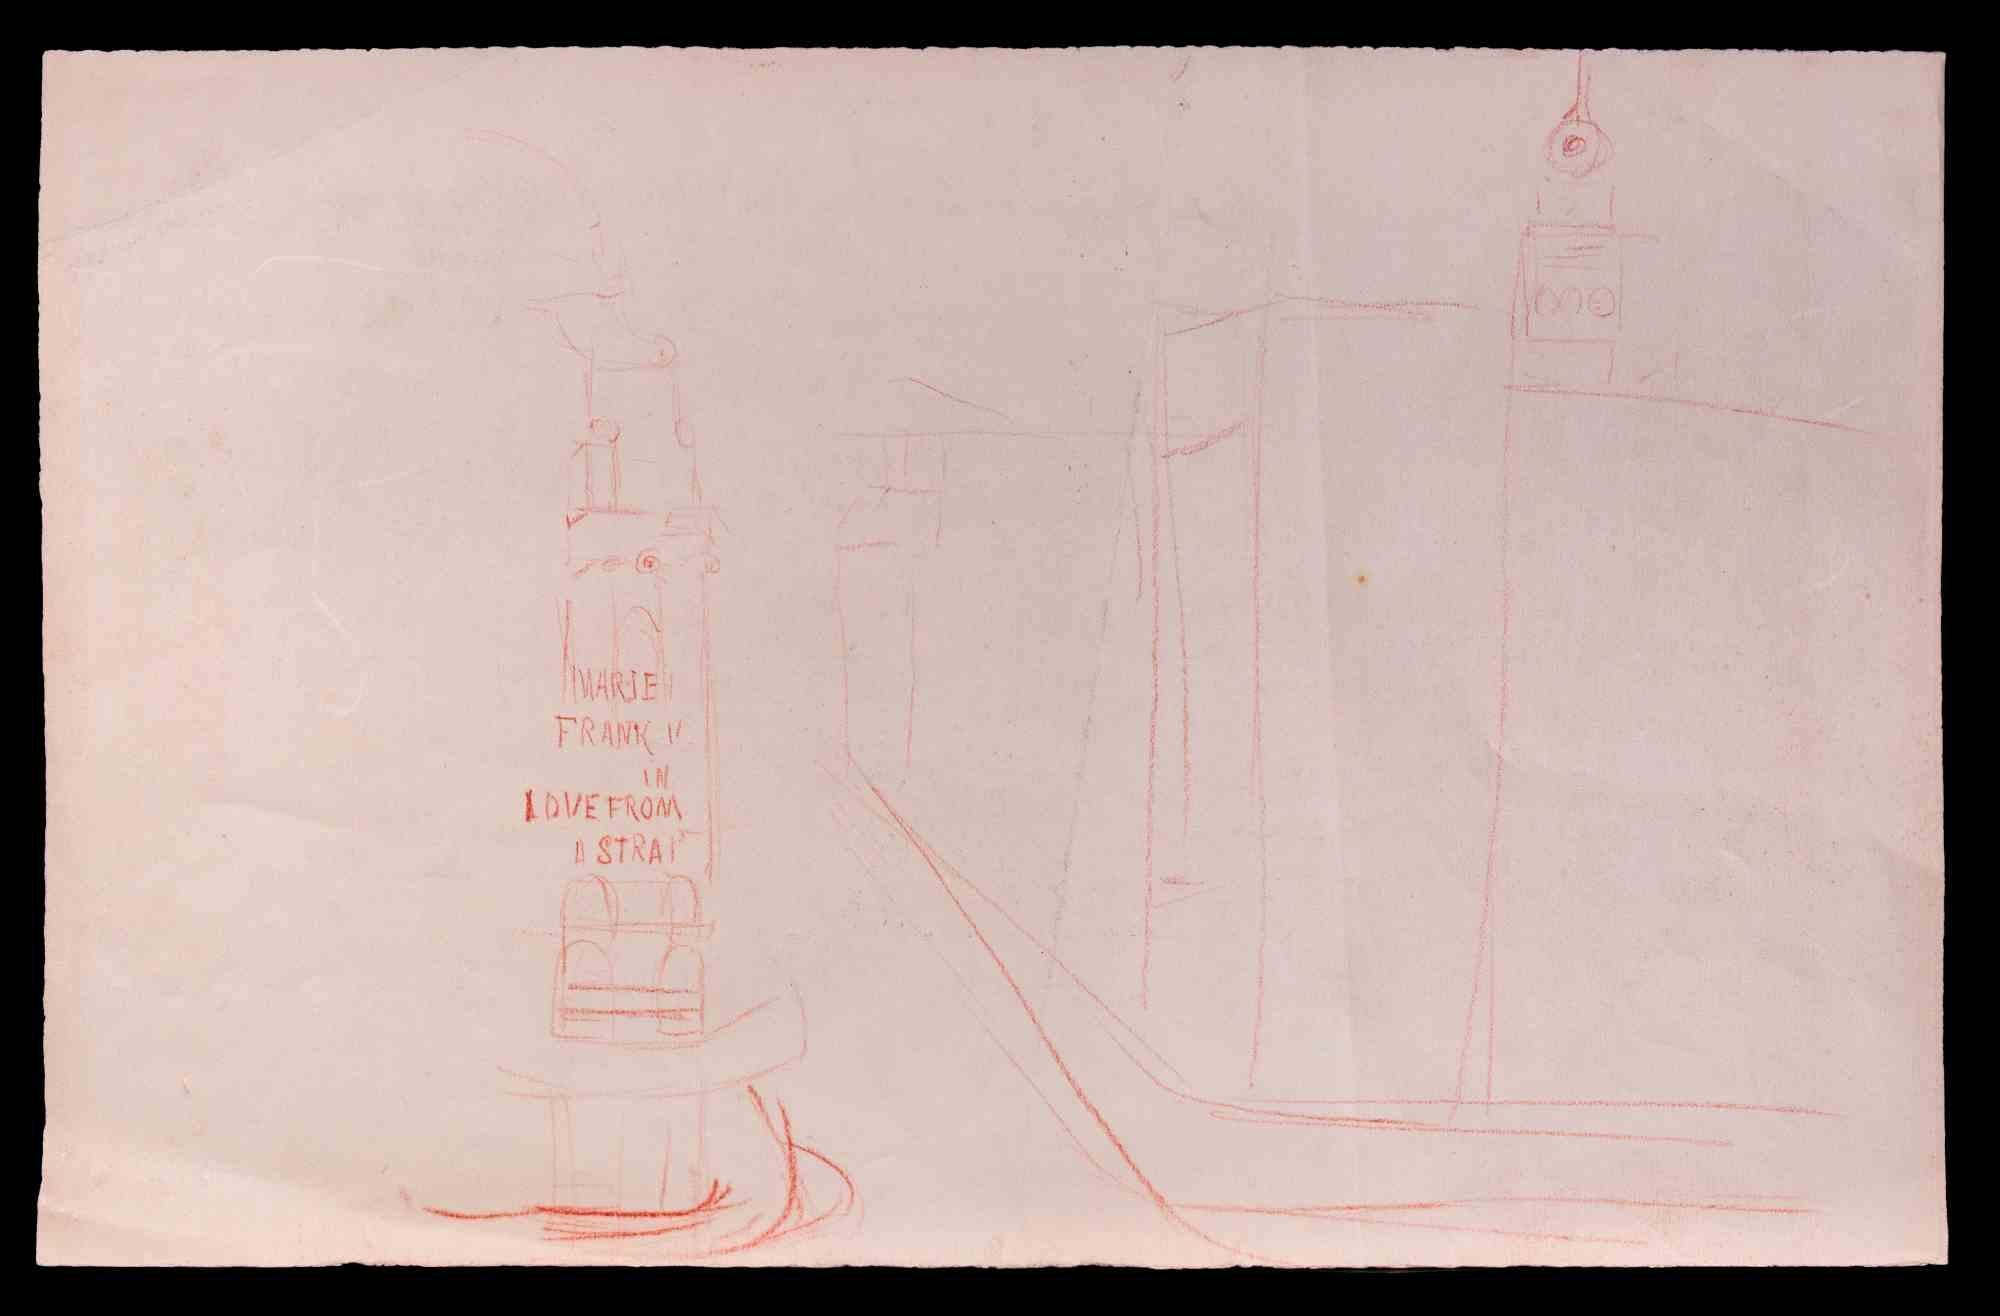 Marie Franke is an original drawing realized in the first decades of the 20th Century by the French artist  Gustave Bourgogne (Veignè, 1888 - Paris, 1968).
Original pencil on paper. 
Good conditions

Gustave Bourgogne   (Veignè, 1888 - Paris, 1968).